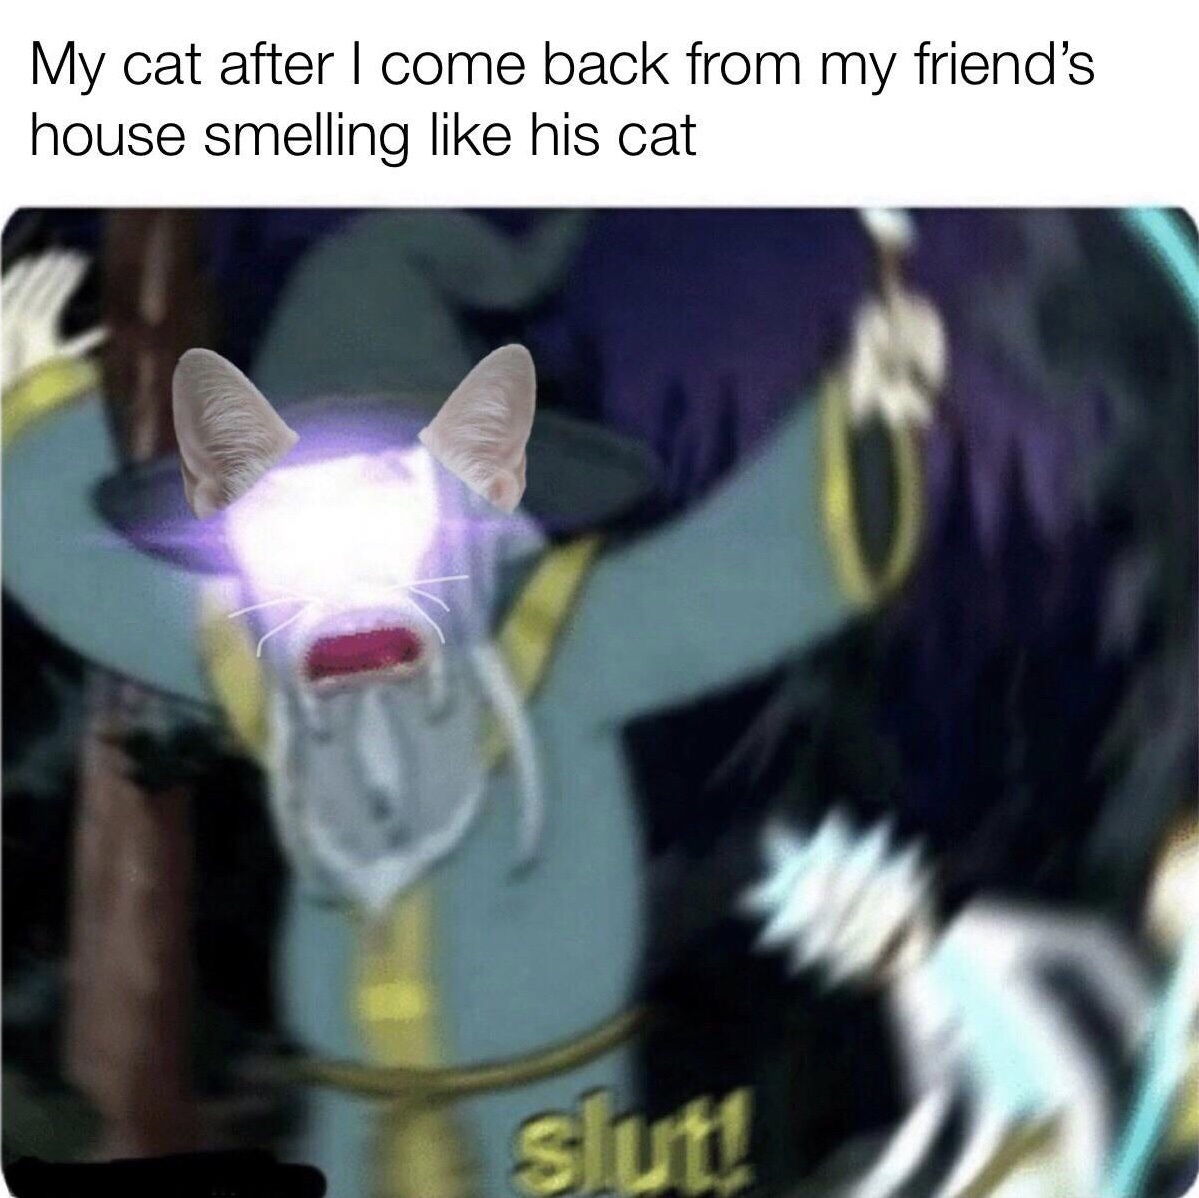 slut meme rick and morty - My cat after I come back from my friend's house smelling his cat sluti